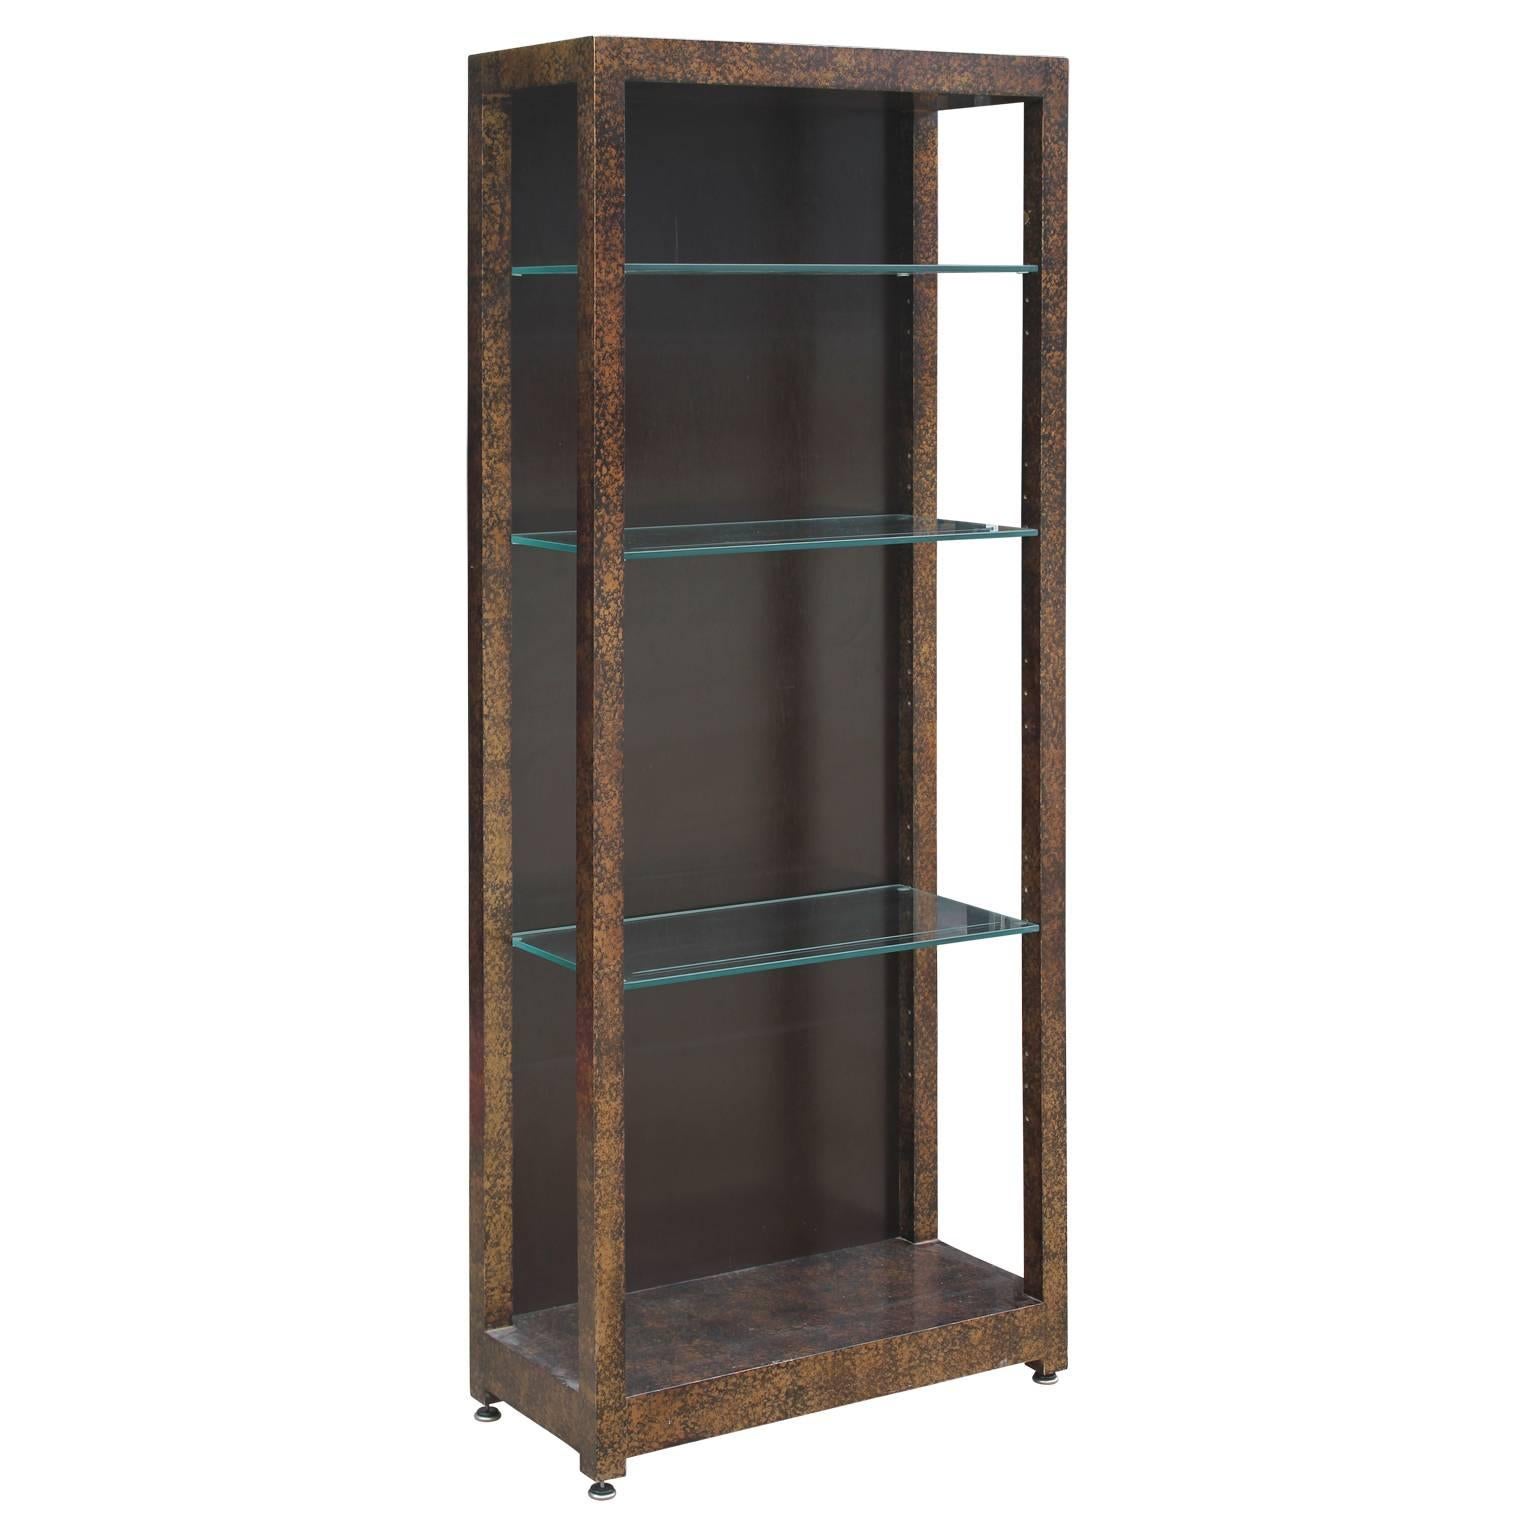 Pair of gorgeous Henredon oil drop display or book cases with a lovely tortoise finish with glass shelves. Each book case can hold up to four adjustable shelves, making them easily customized.